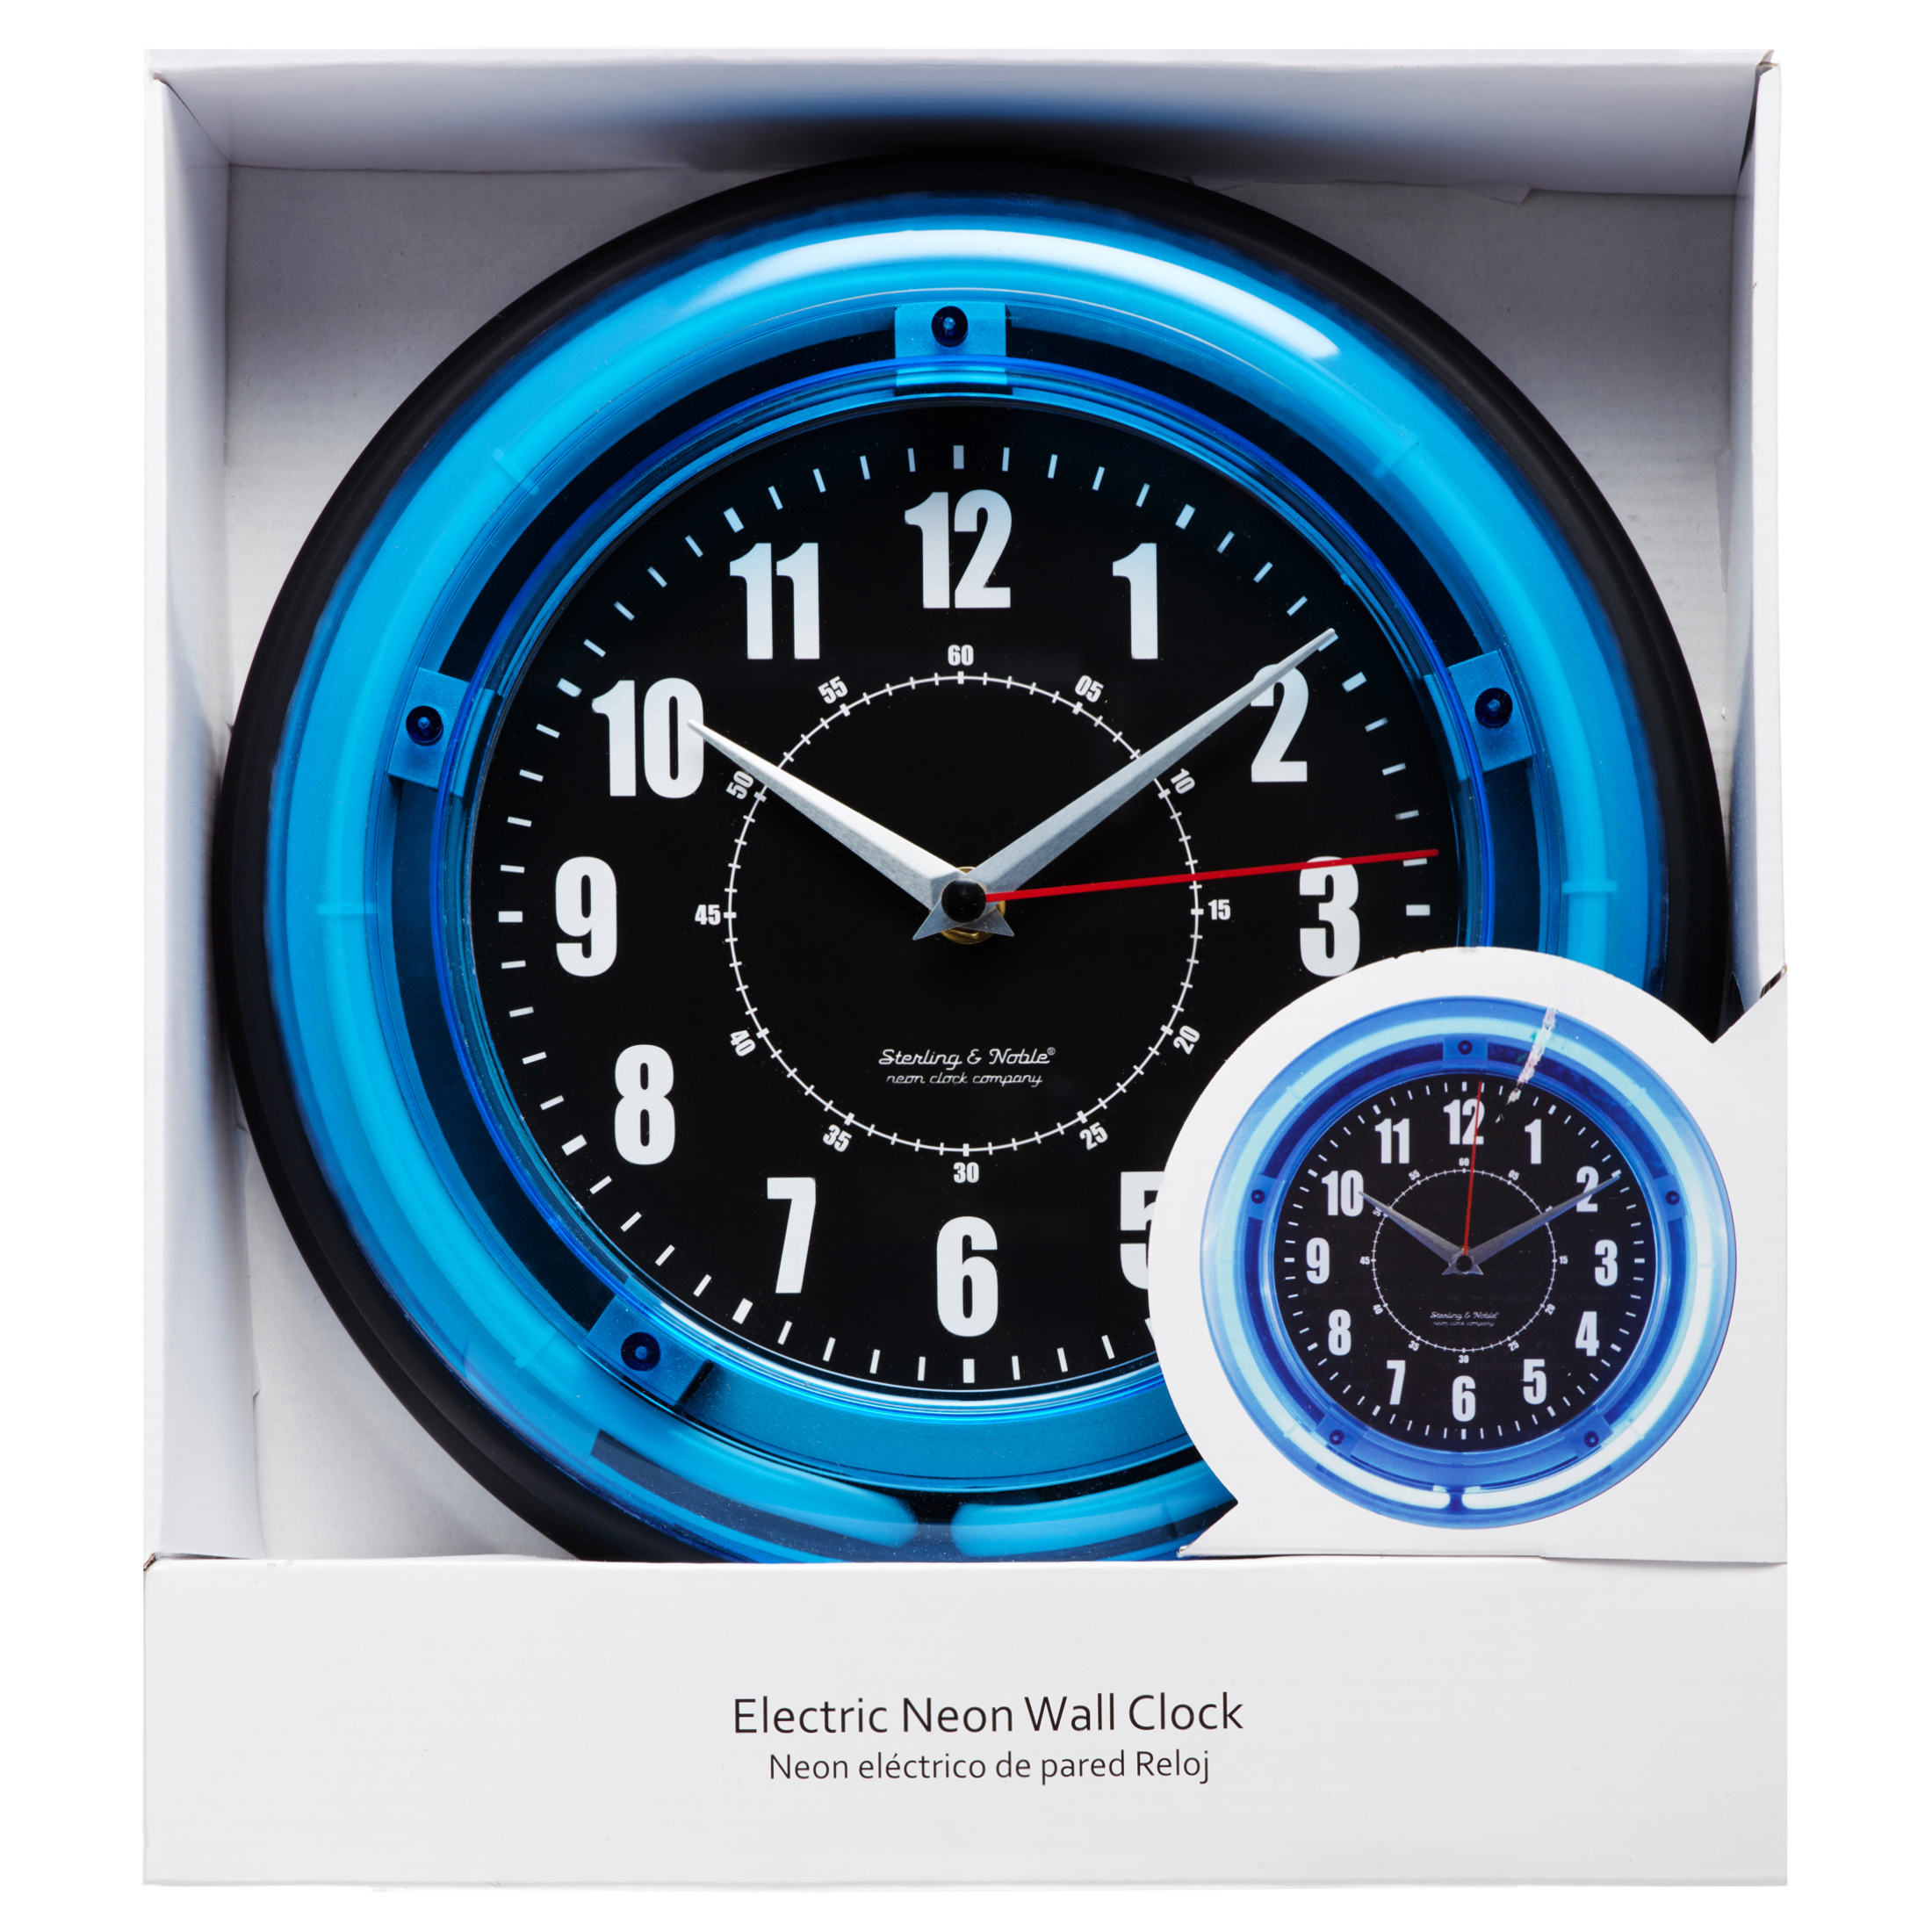 Sterling and Noble 11" Vibrant Blue Neon Analog Wall Clock - image 5 of 10